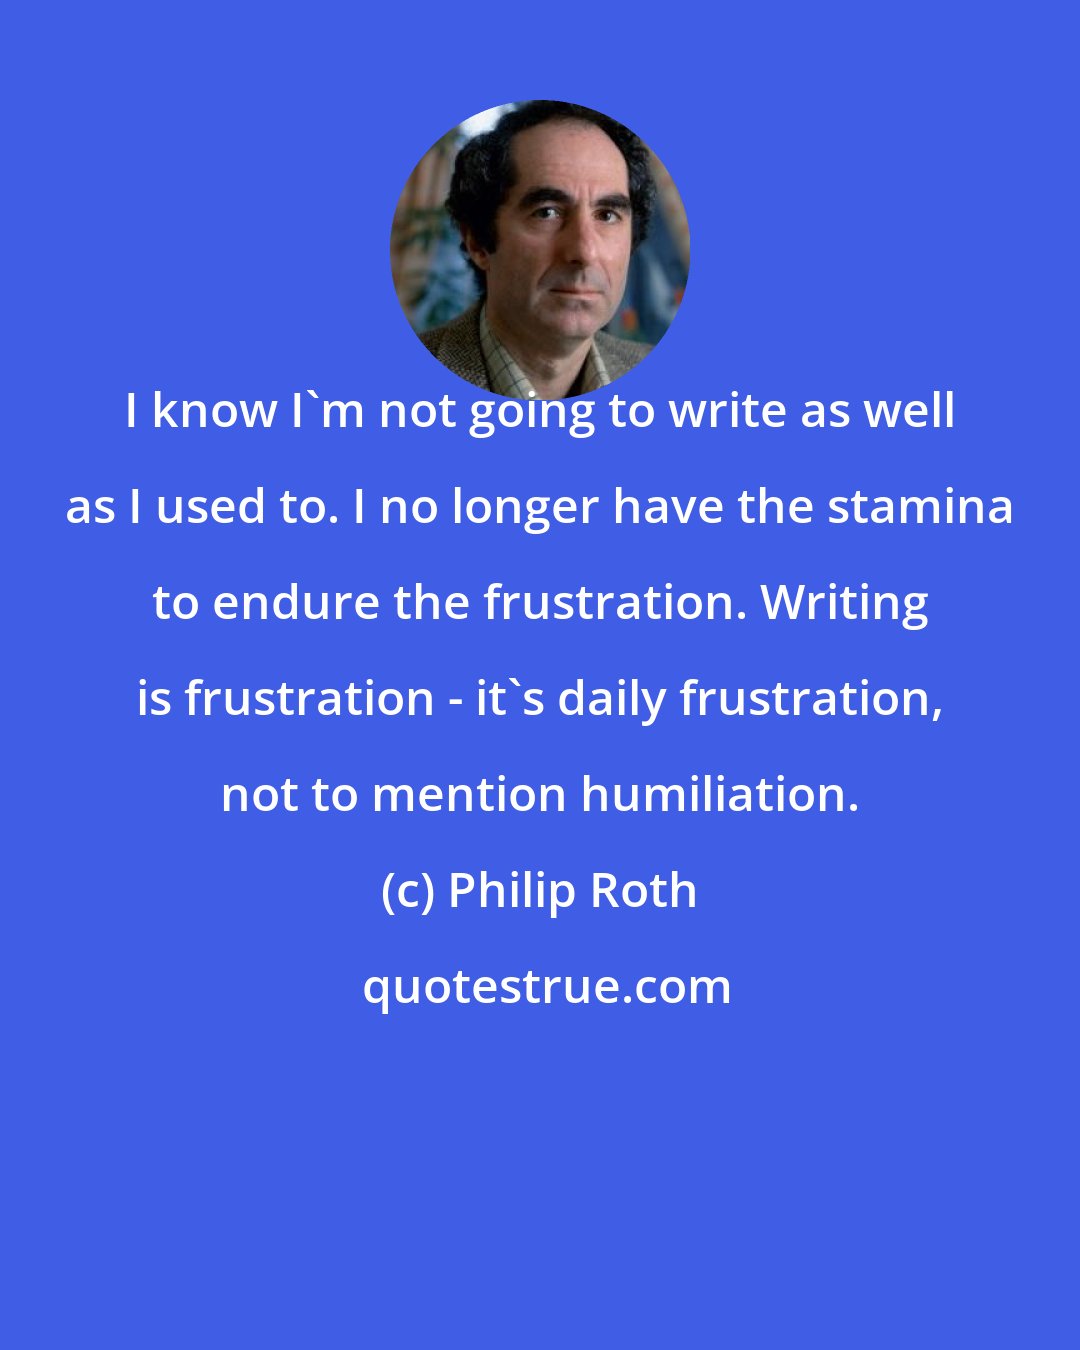 Philip Roth: I know I'm not going to write as well as I used to. I no longer have the stamina to endure the frustration. Writing is frustration - it's daily frustration, not to mention humiliation.